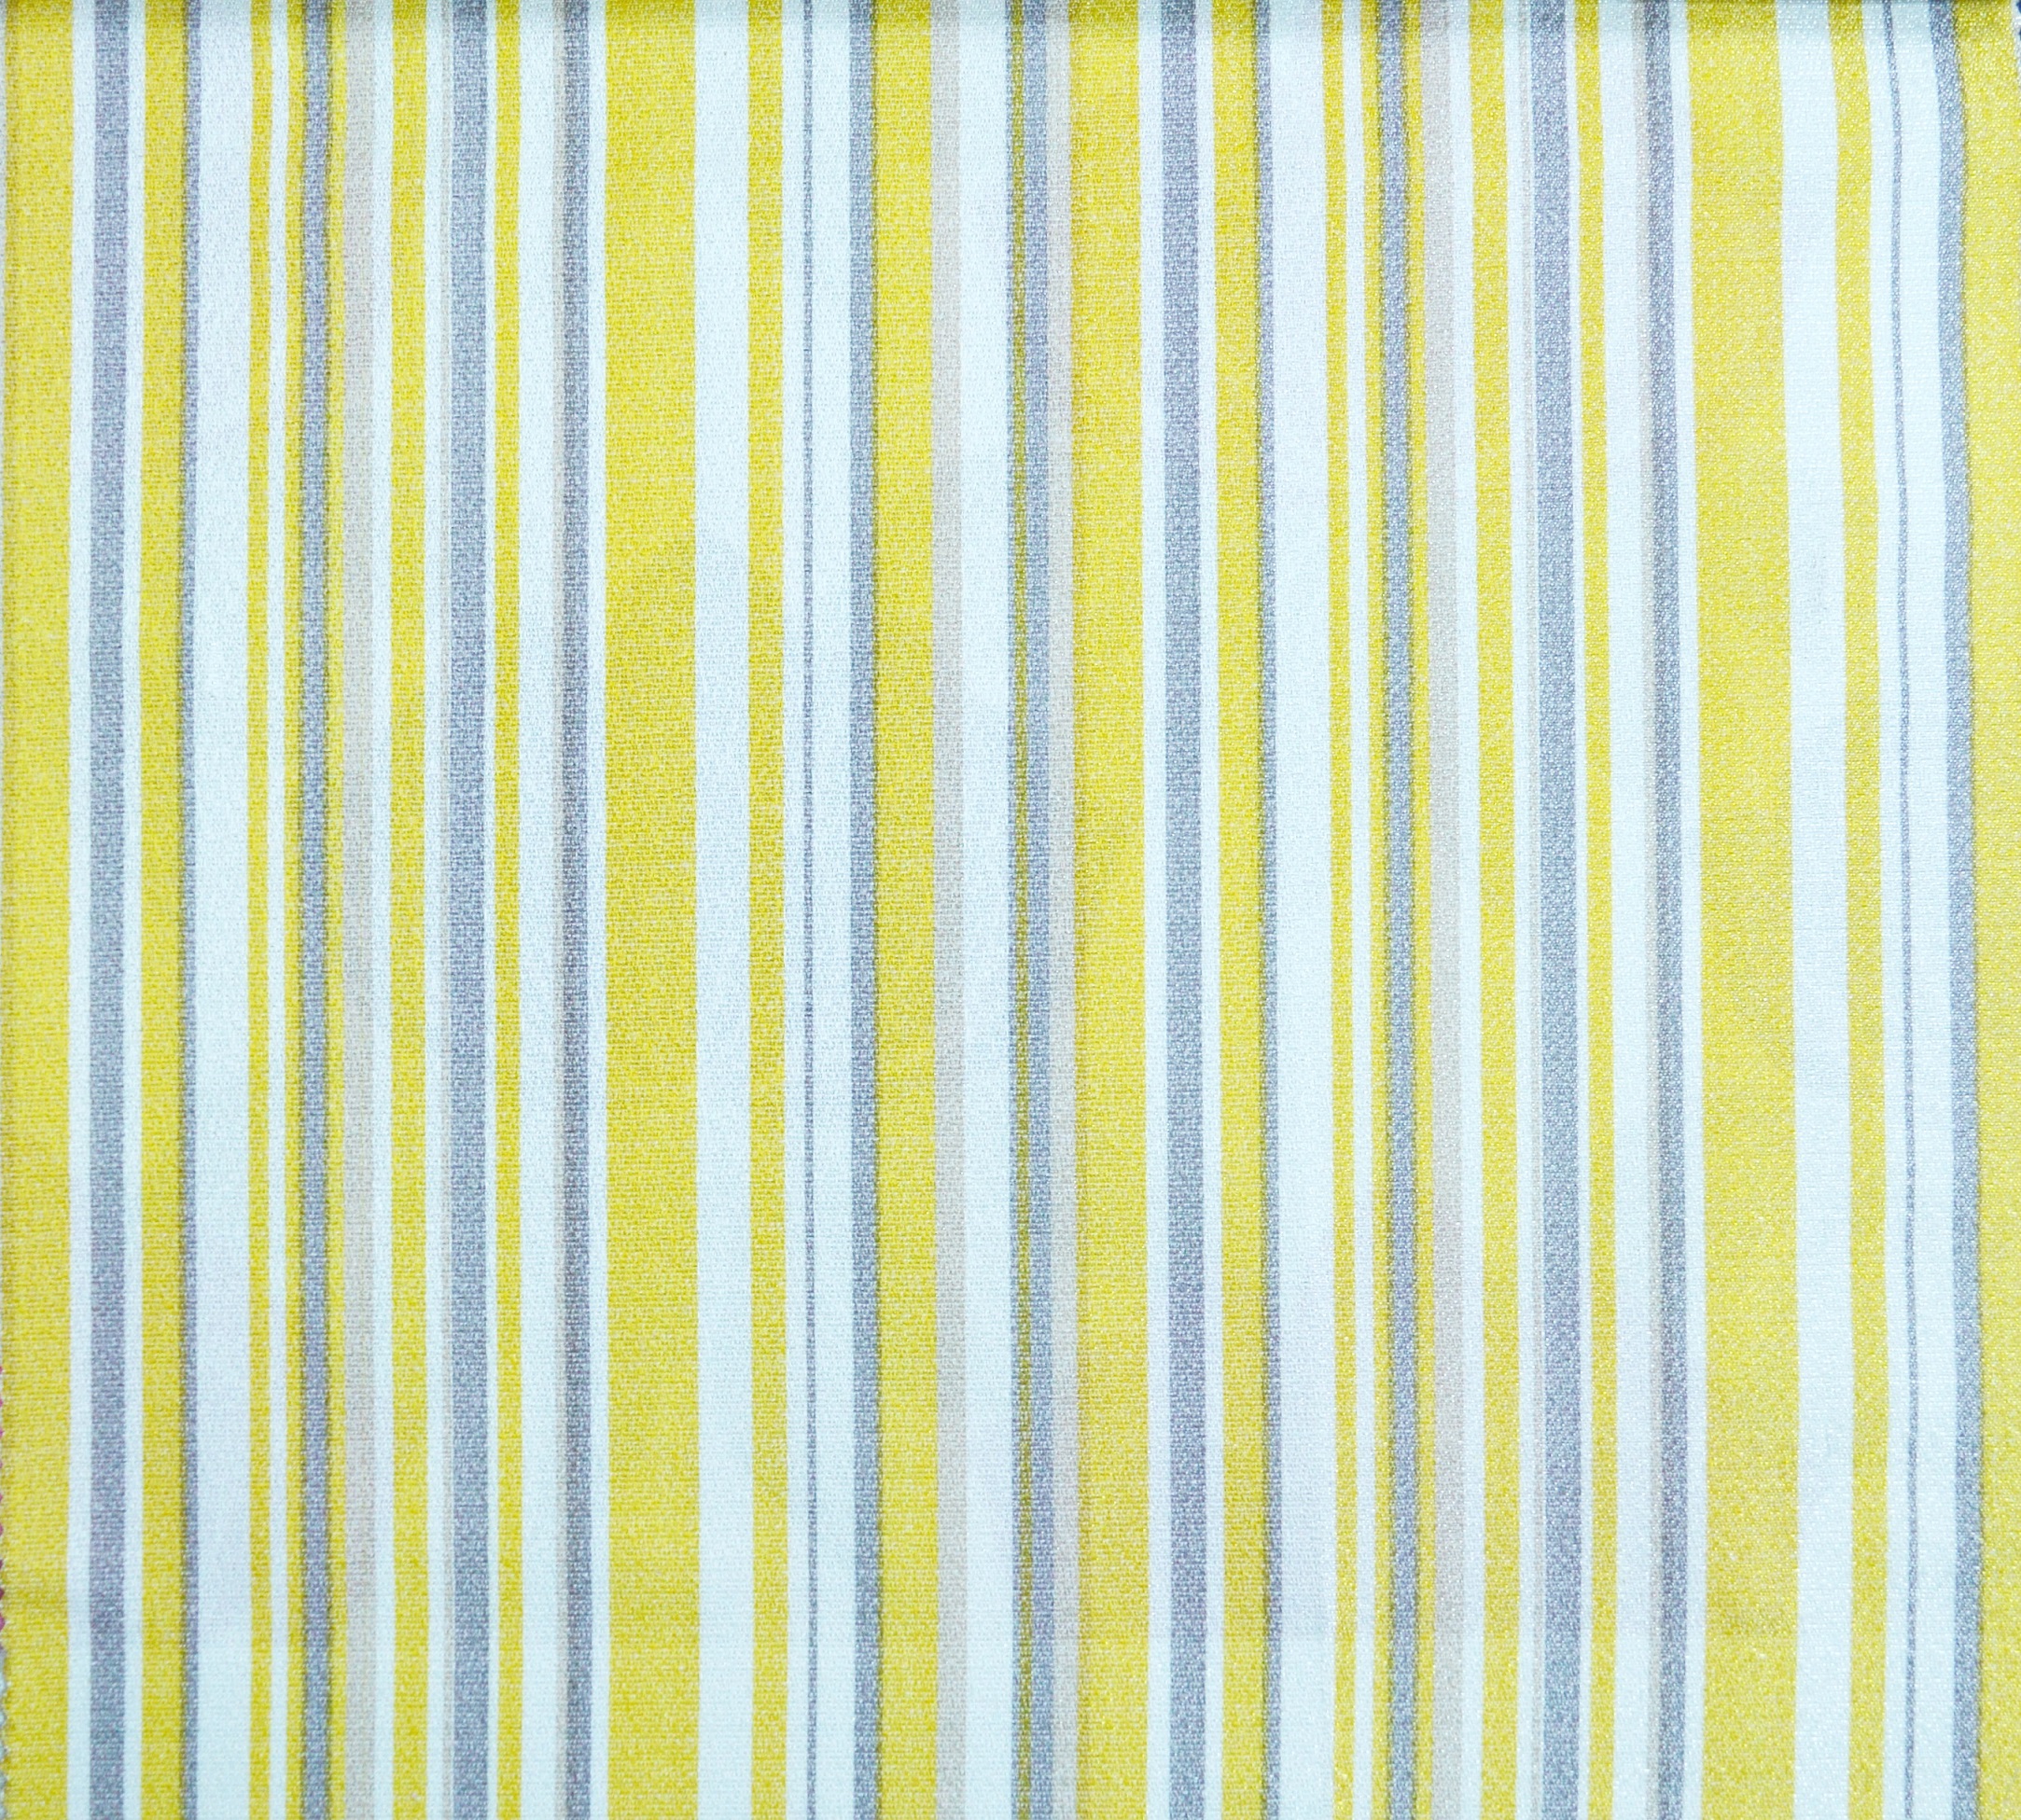 Isabella Yellow Striped Curtain, Blue And Yellow Striped Curtain Fabric